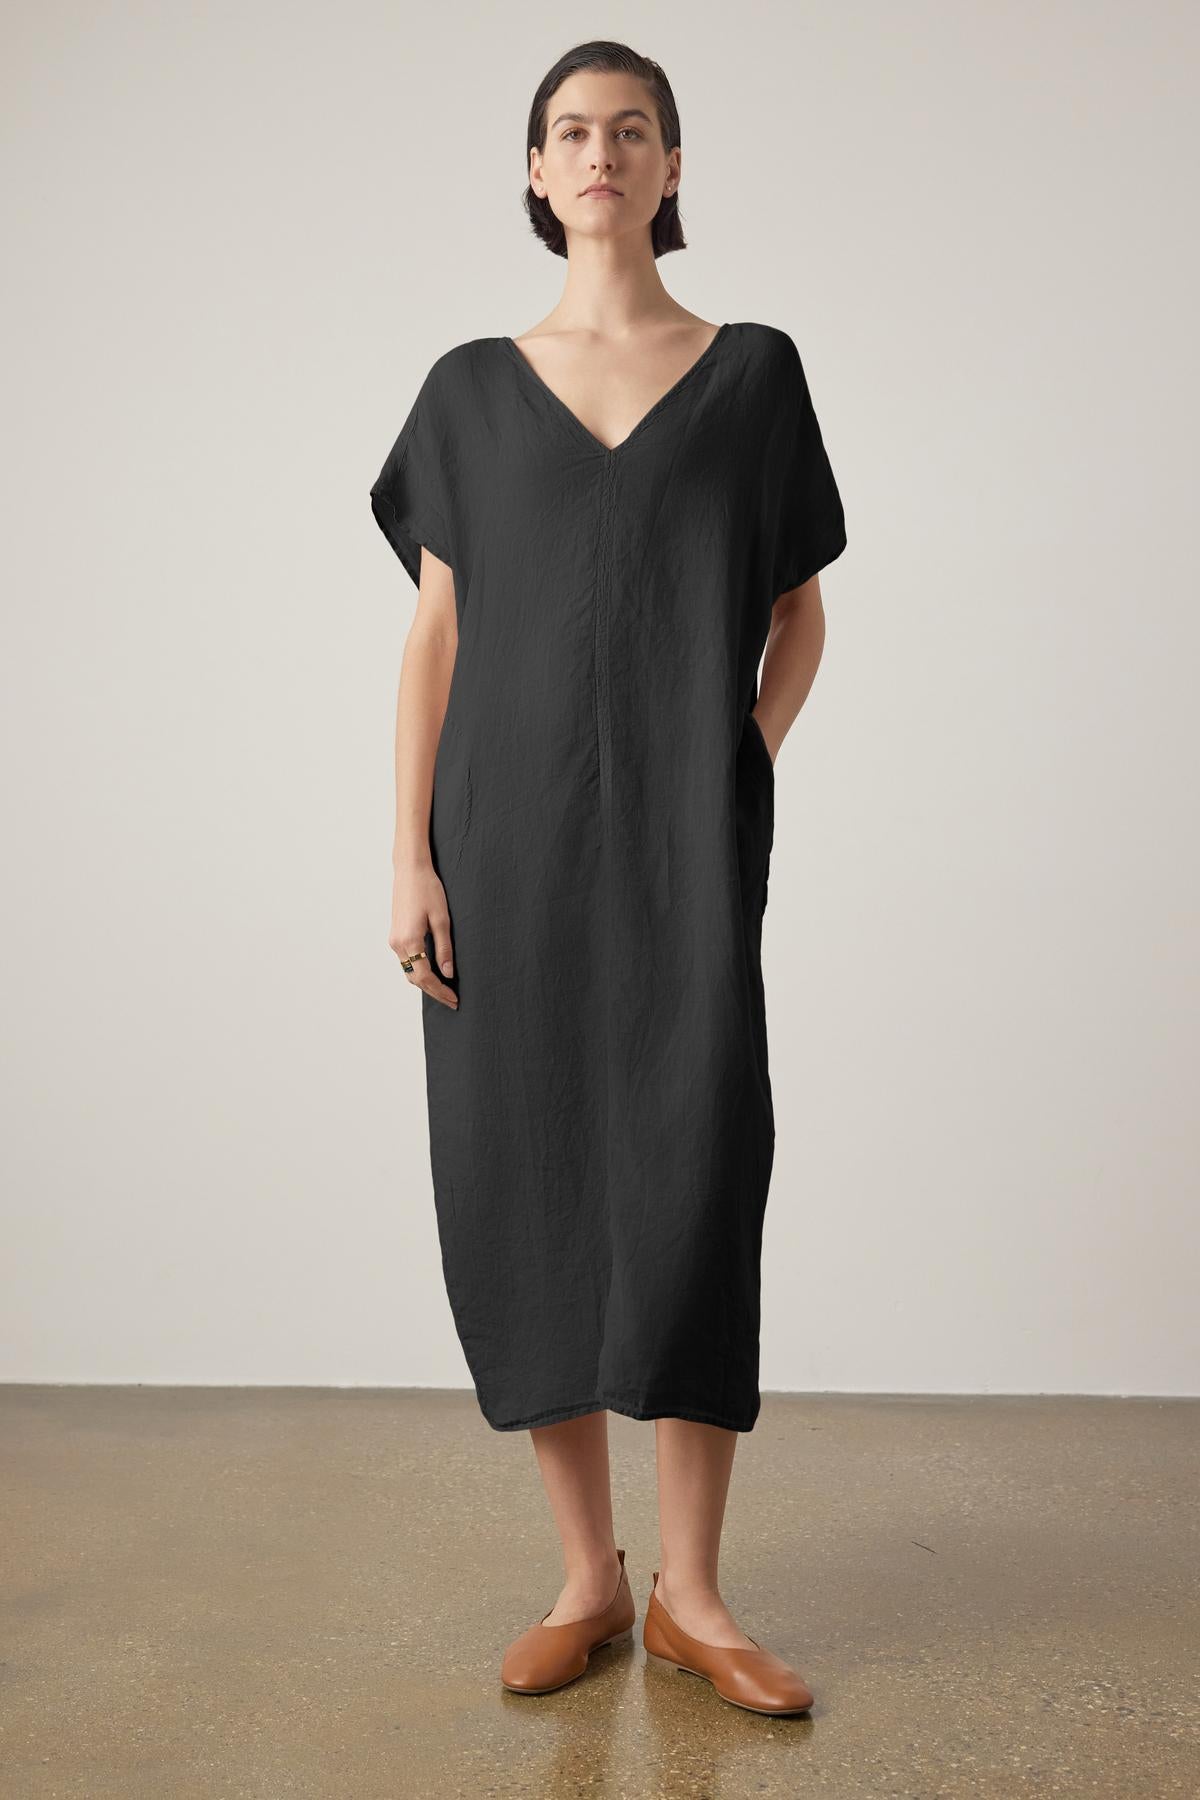 A woman in a loose black Montana linen dress by Velvet by Jenny Graham with a V neckline and brown loafers stands against a neutral backdrop, looking directly at the camera.-36863315345601